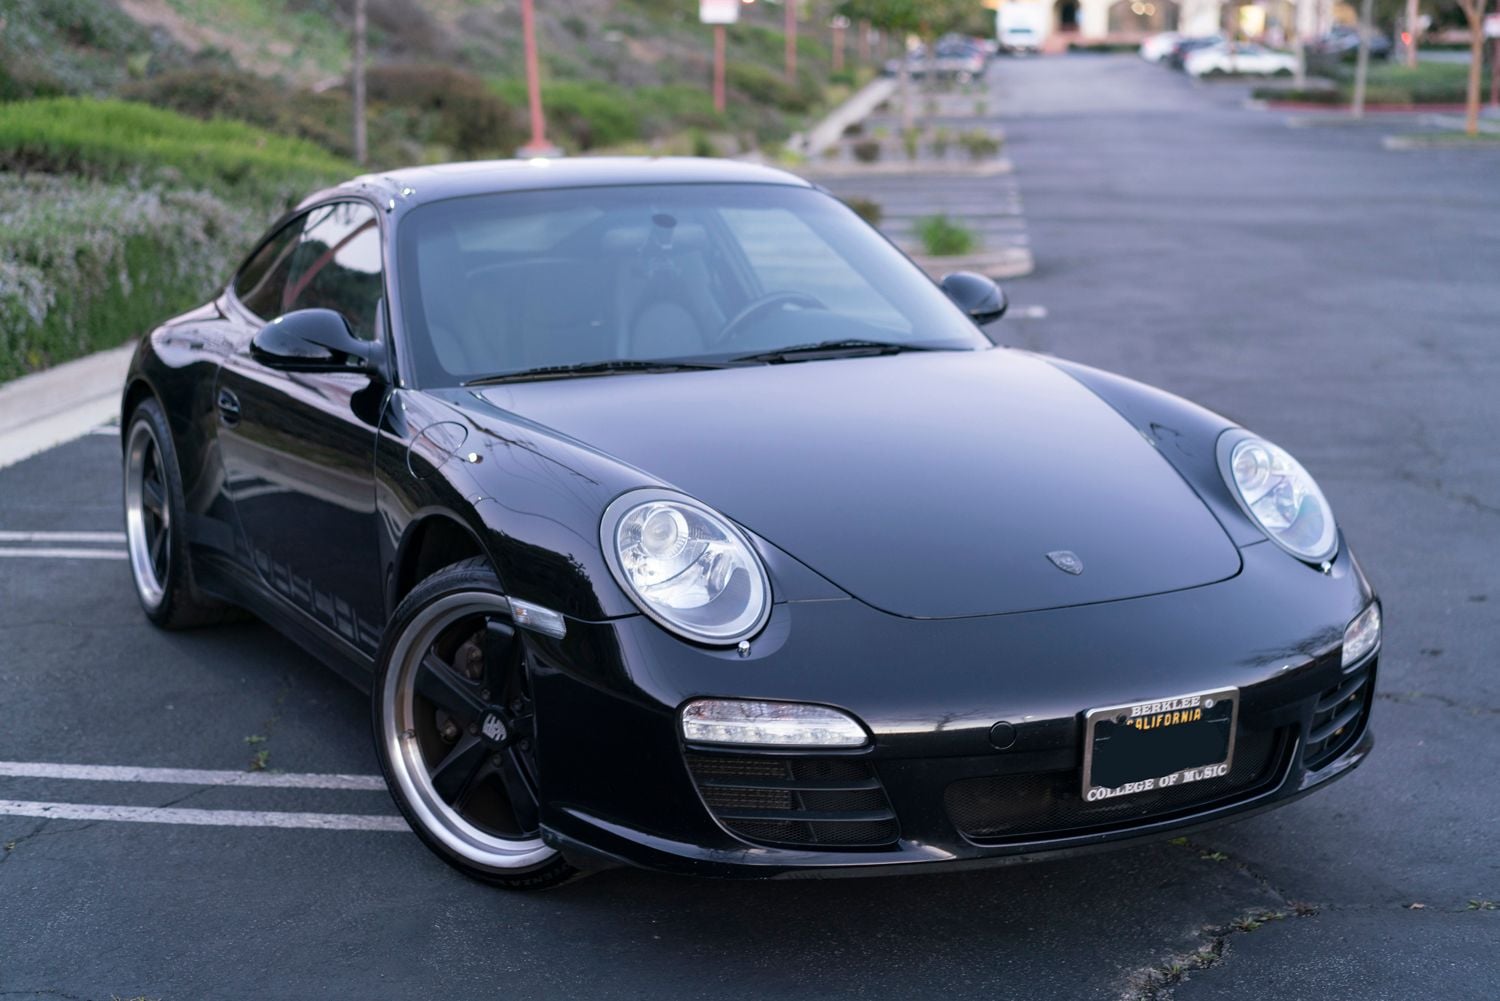 2011 Porsche 911 - 2011 Porsche 911 C2 997.2 6 Speed Manual - Used - VIN WP0AA2A99BS706420 - 88,400 Miles - 6 cyl - 2WD - Manual - Coupe - Black - Agoura Hills, CA 91301, United States